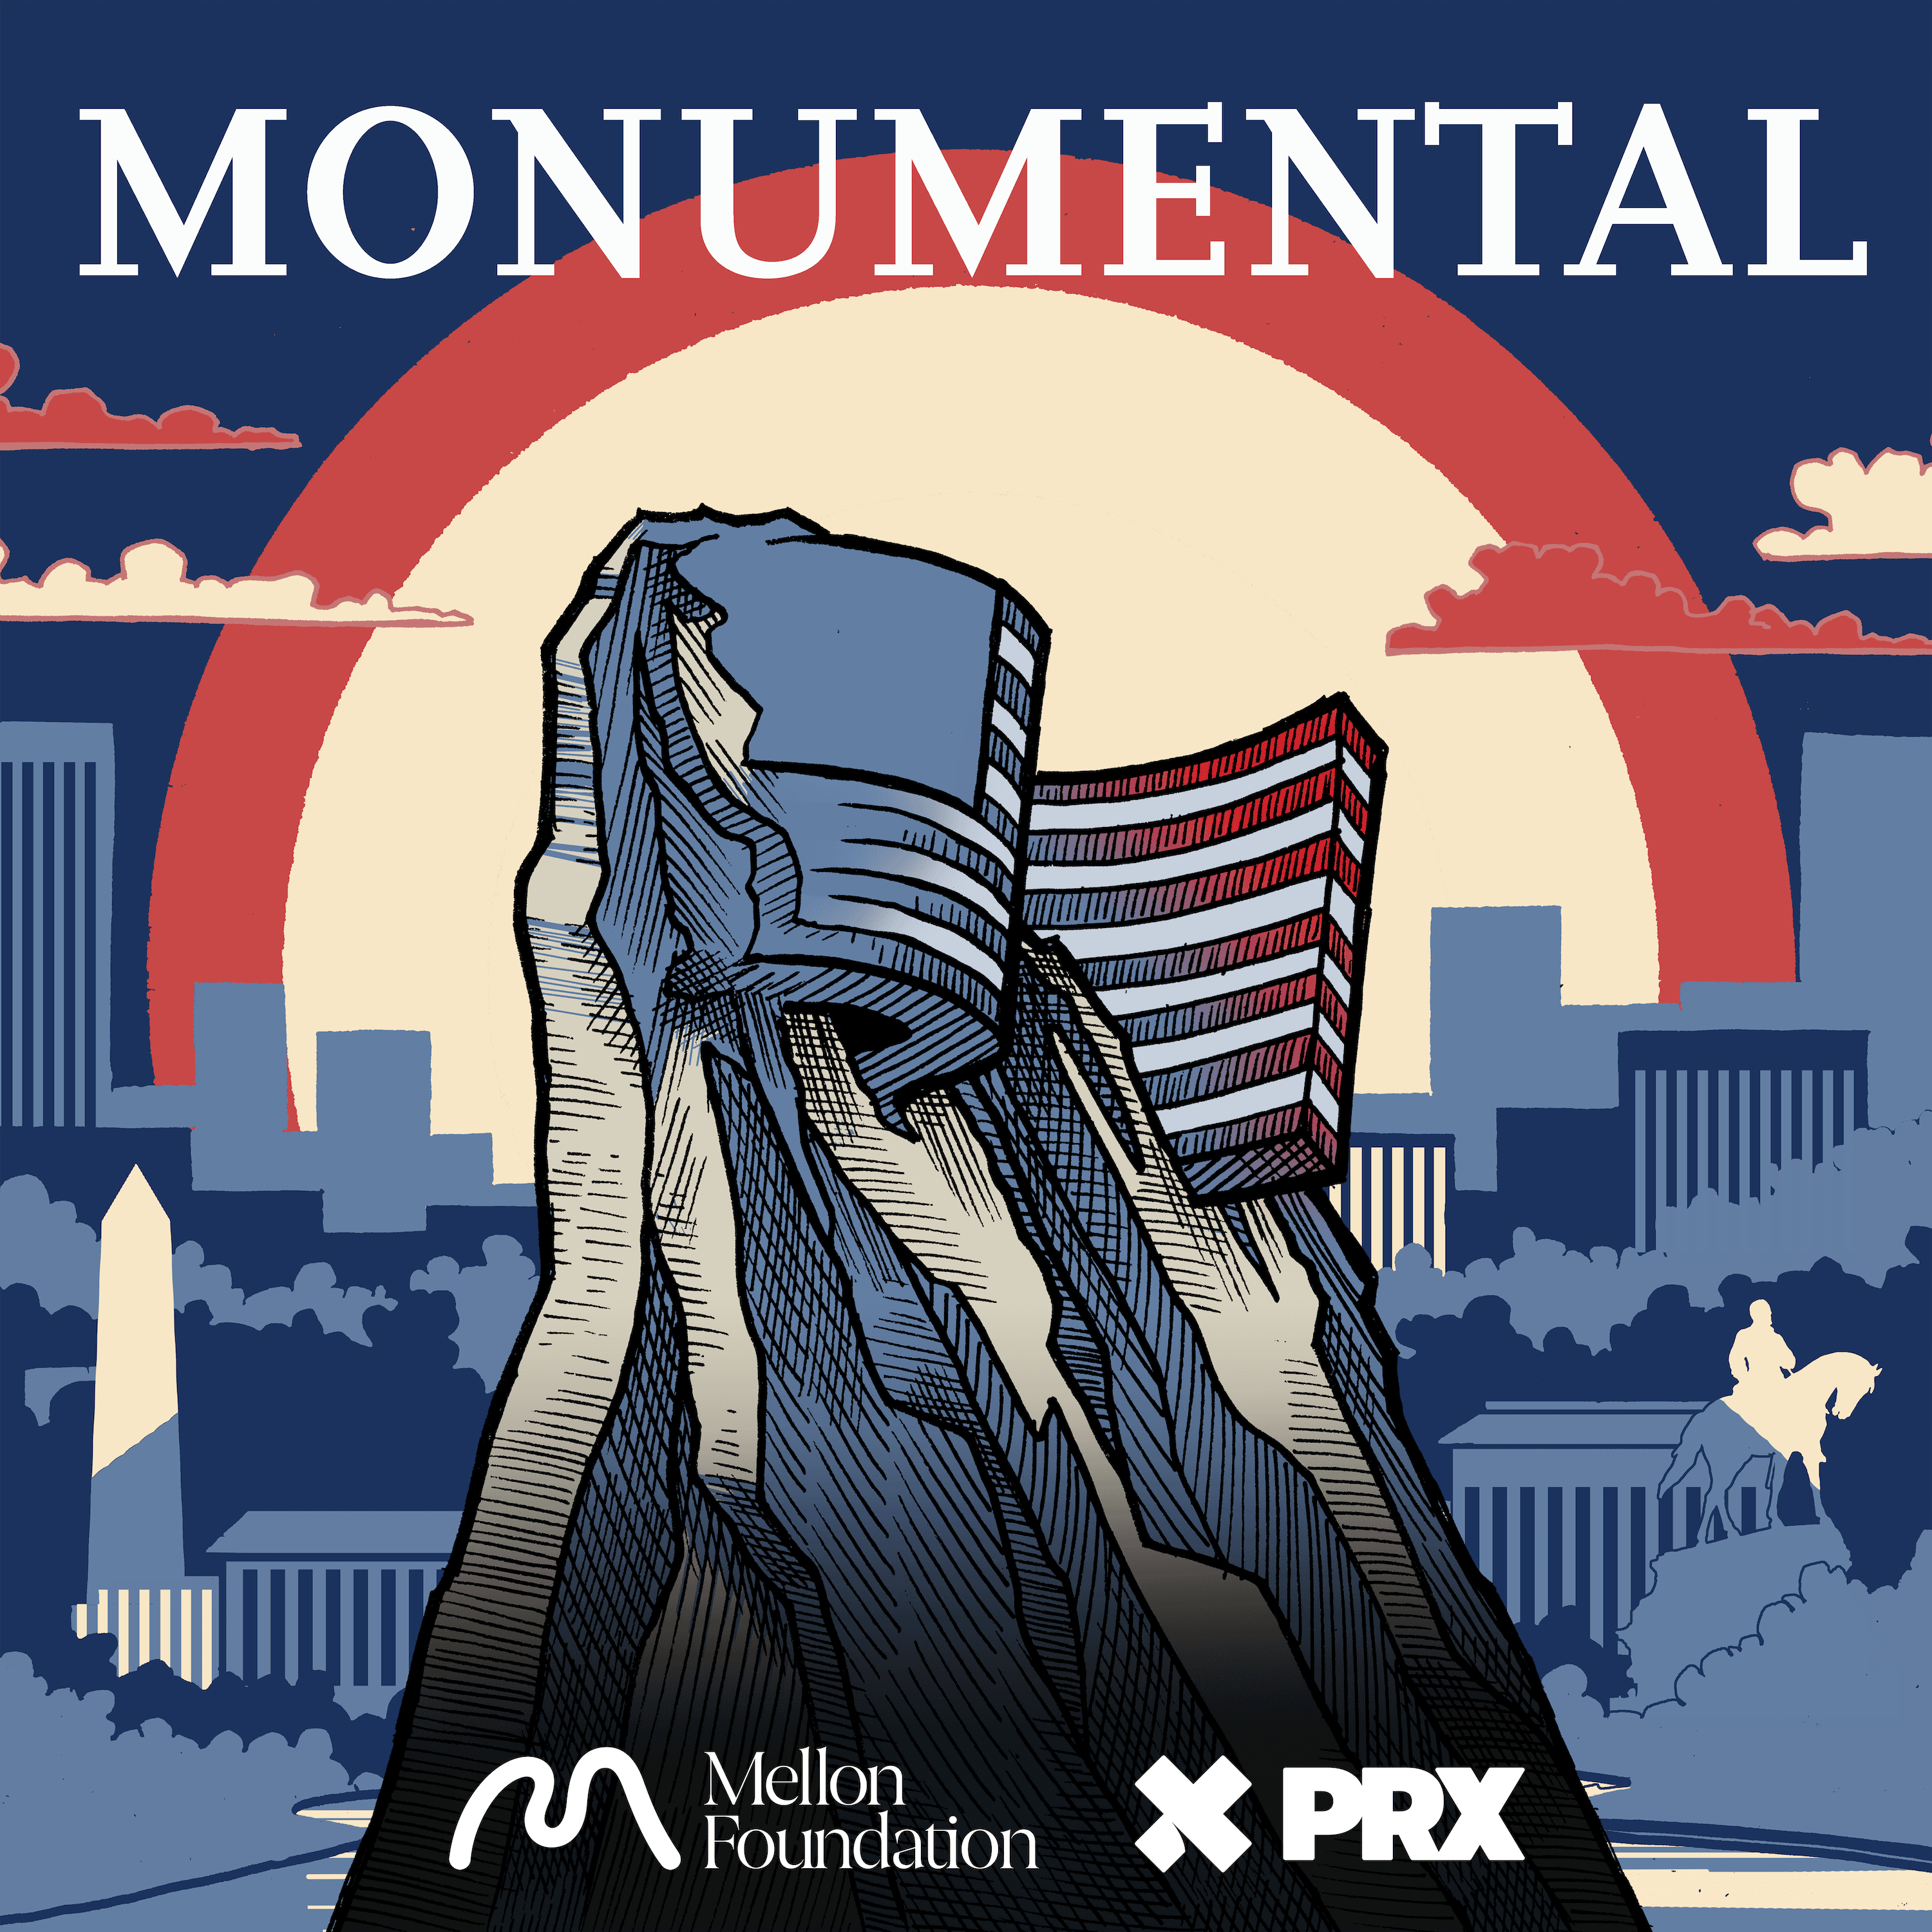 Thumbnail for "Introducing: Monumental".